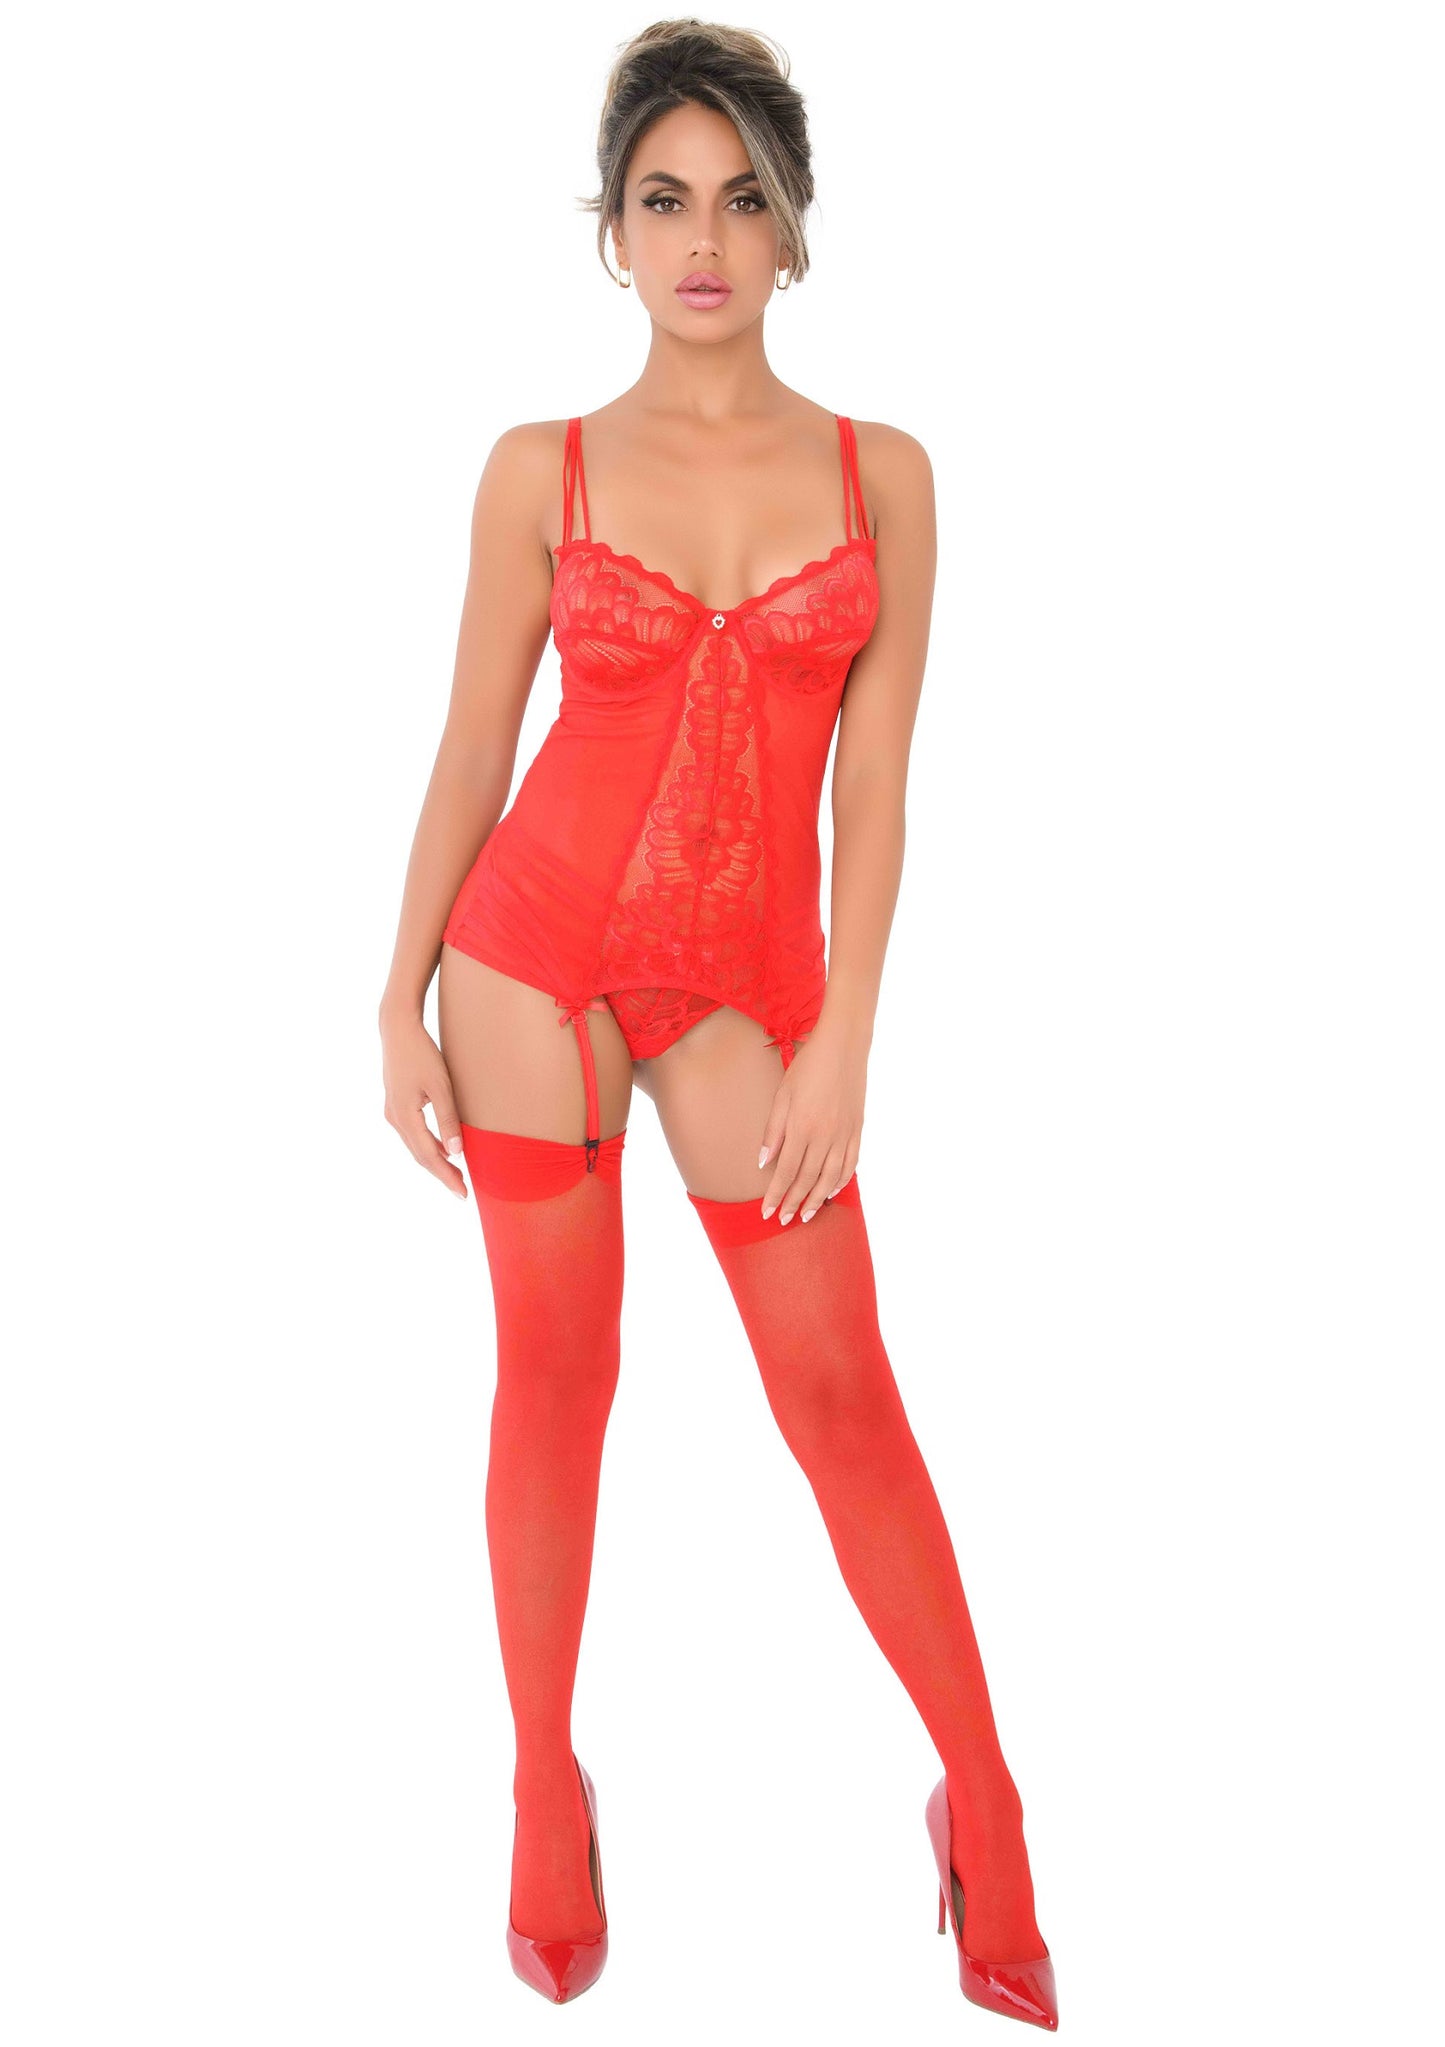 Daring Intimates Mix & Match Lace Cami Corset with string RED S - 0